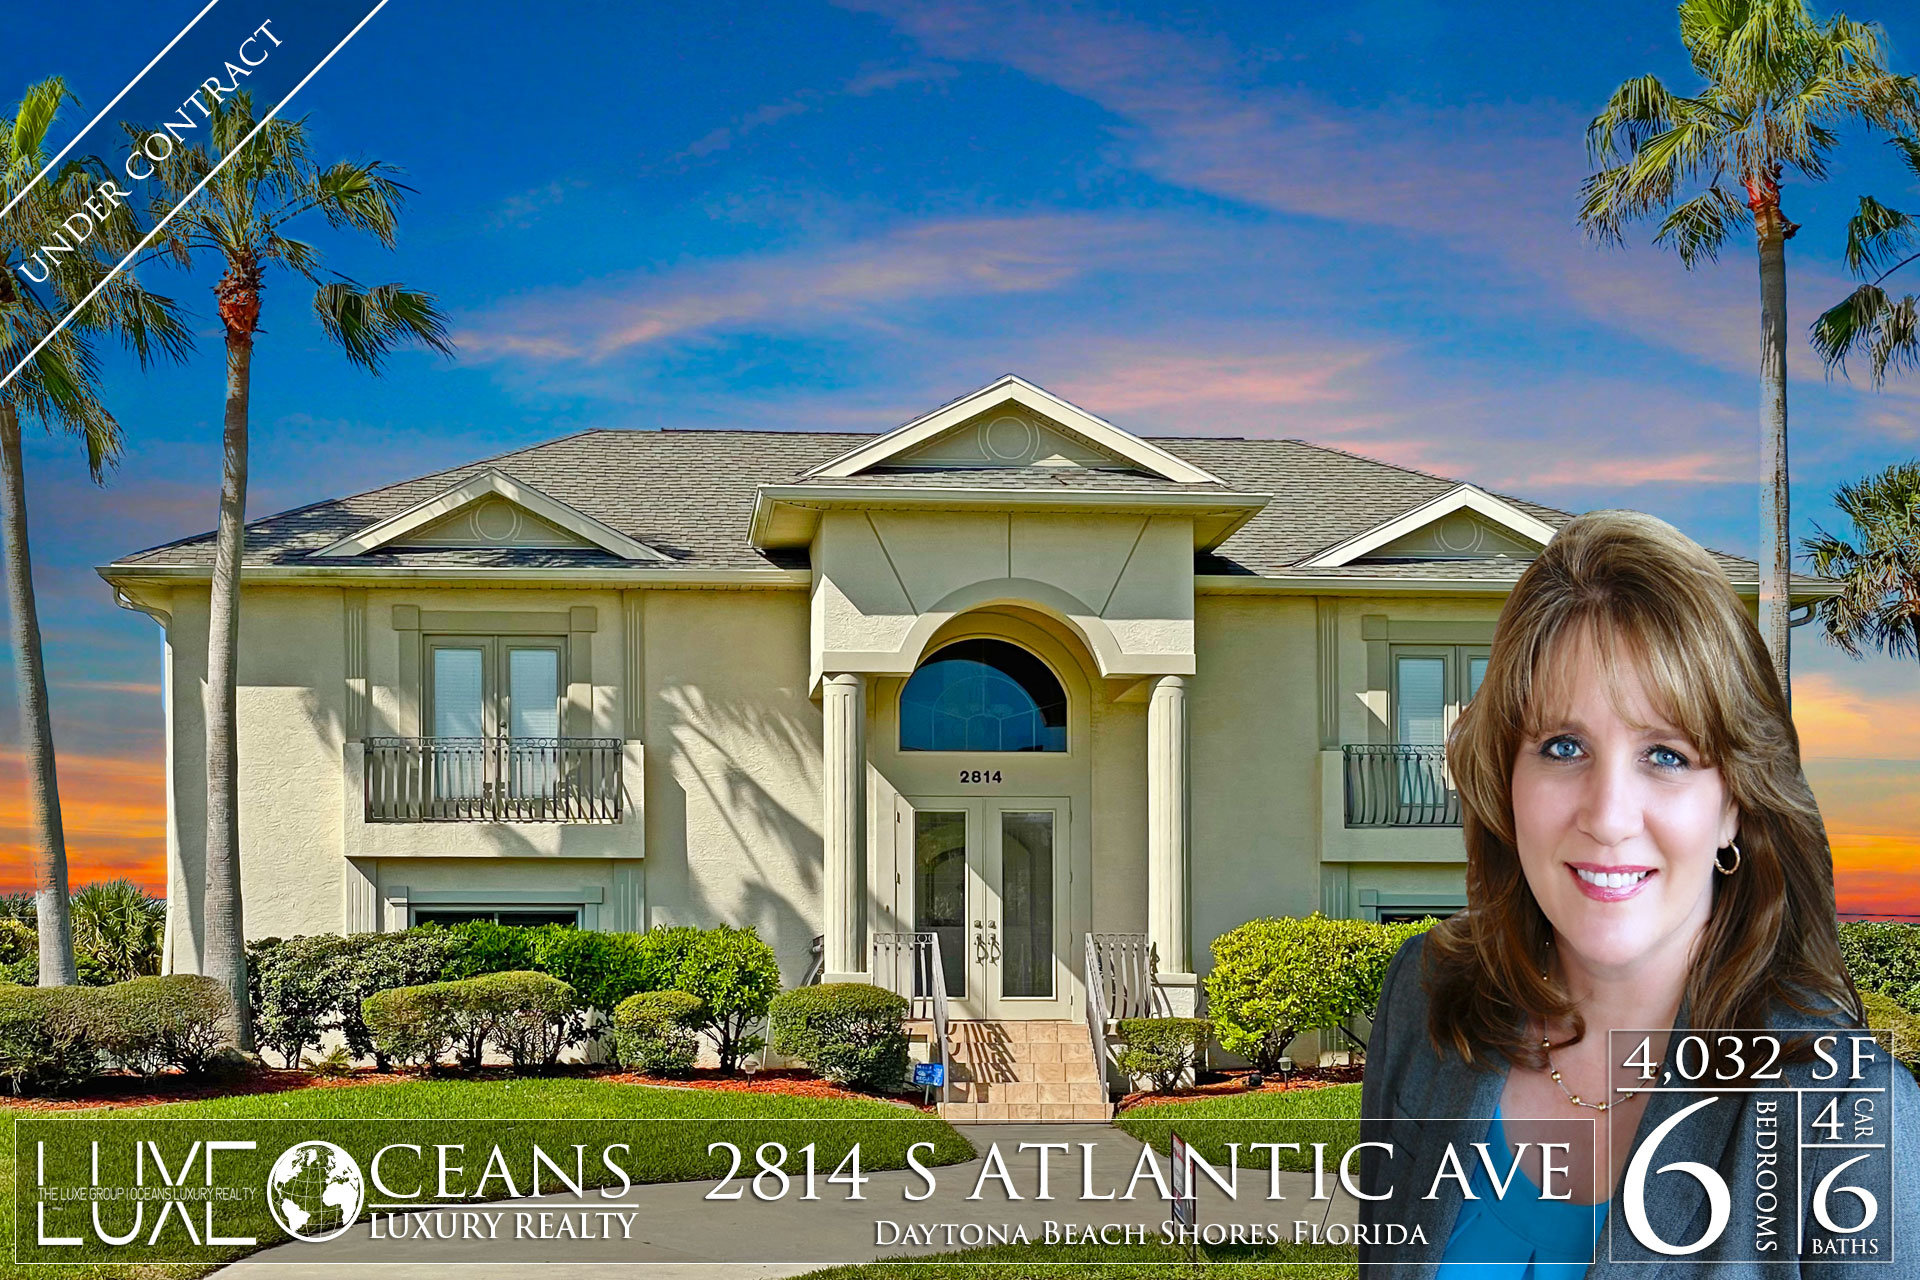 Daytona Beach Shores Ocean View Homes For Sale - 2814 S Atlantic Ave Waterfront Homes Under Contract